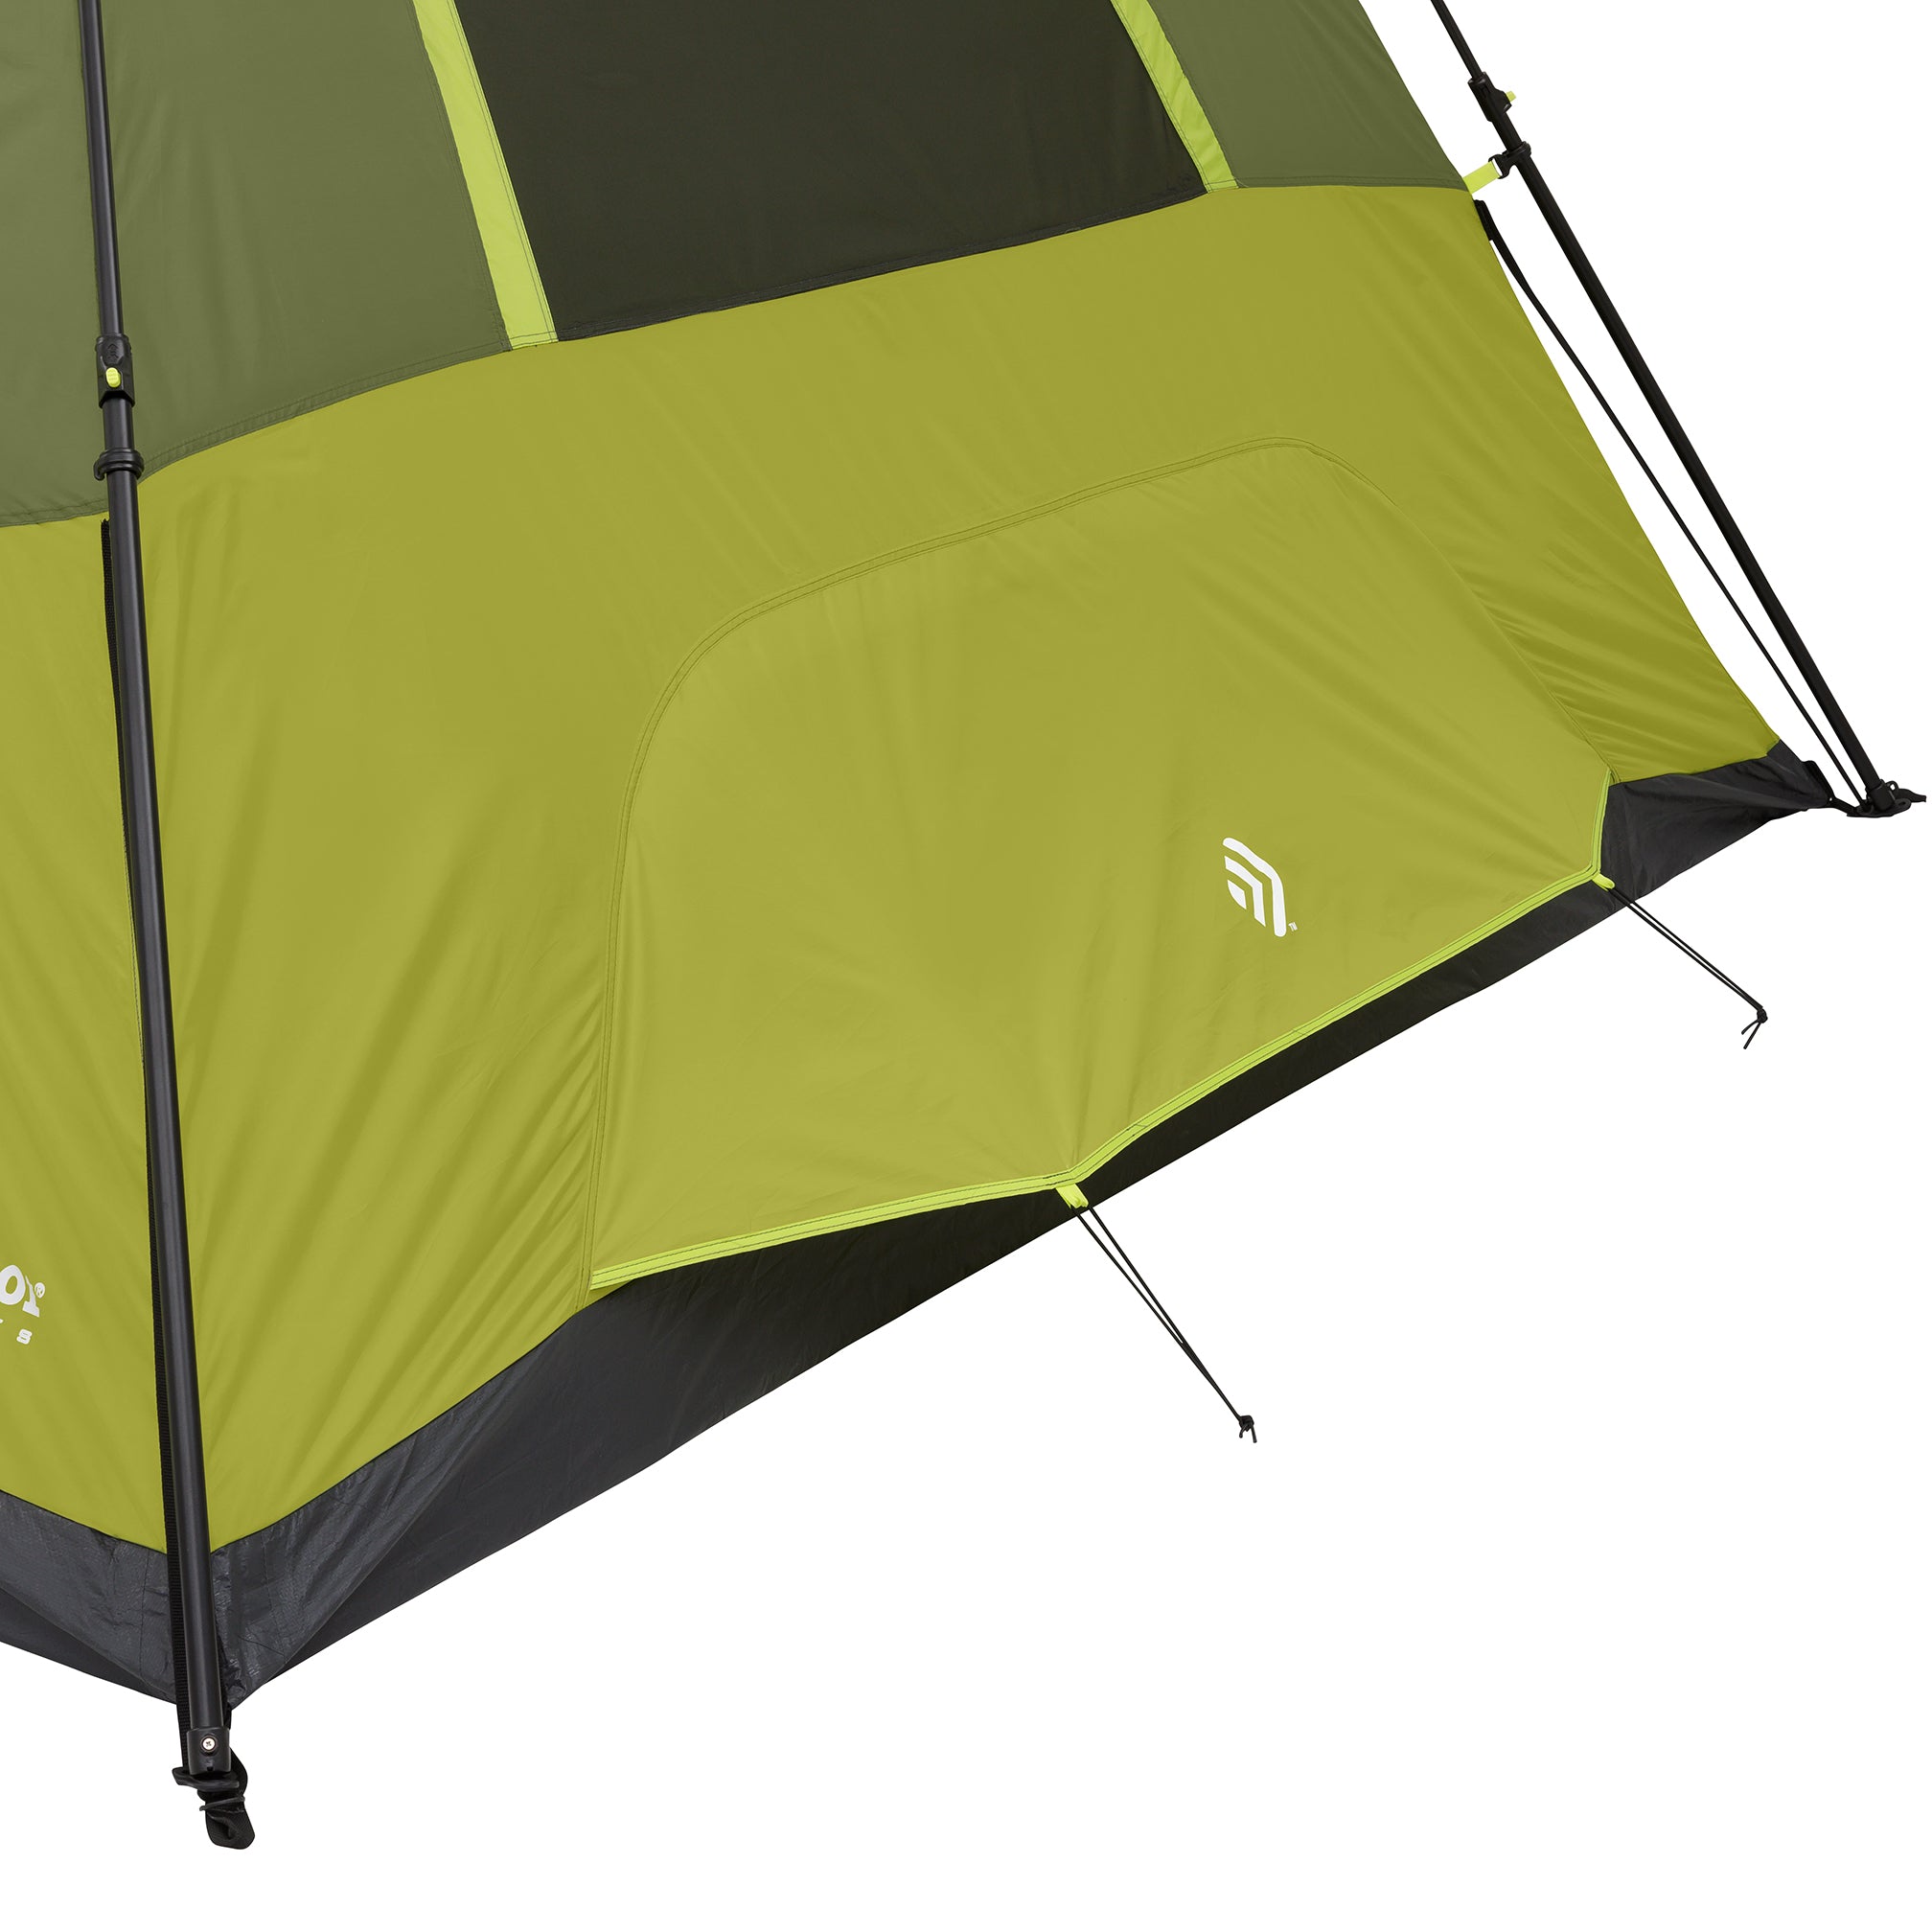 6-Person Instant Cabin Tent w/ LED Lighted Hub + Carry Bag| New Opened Box